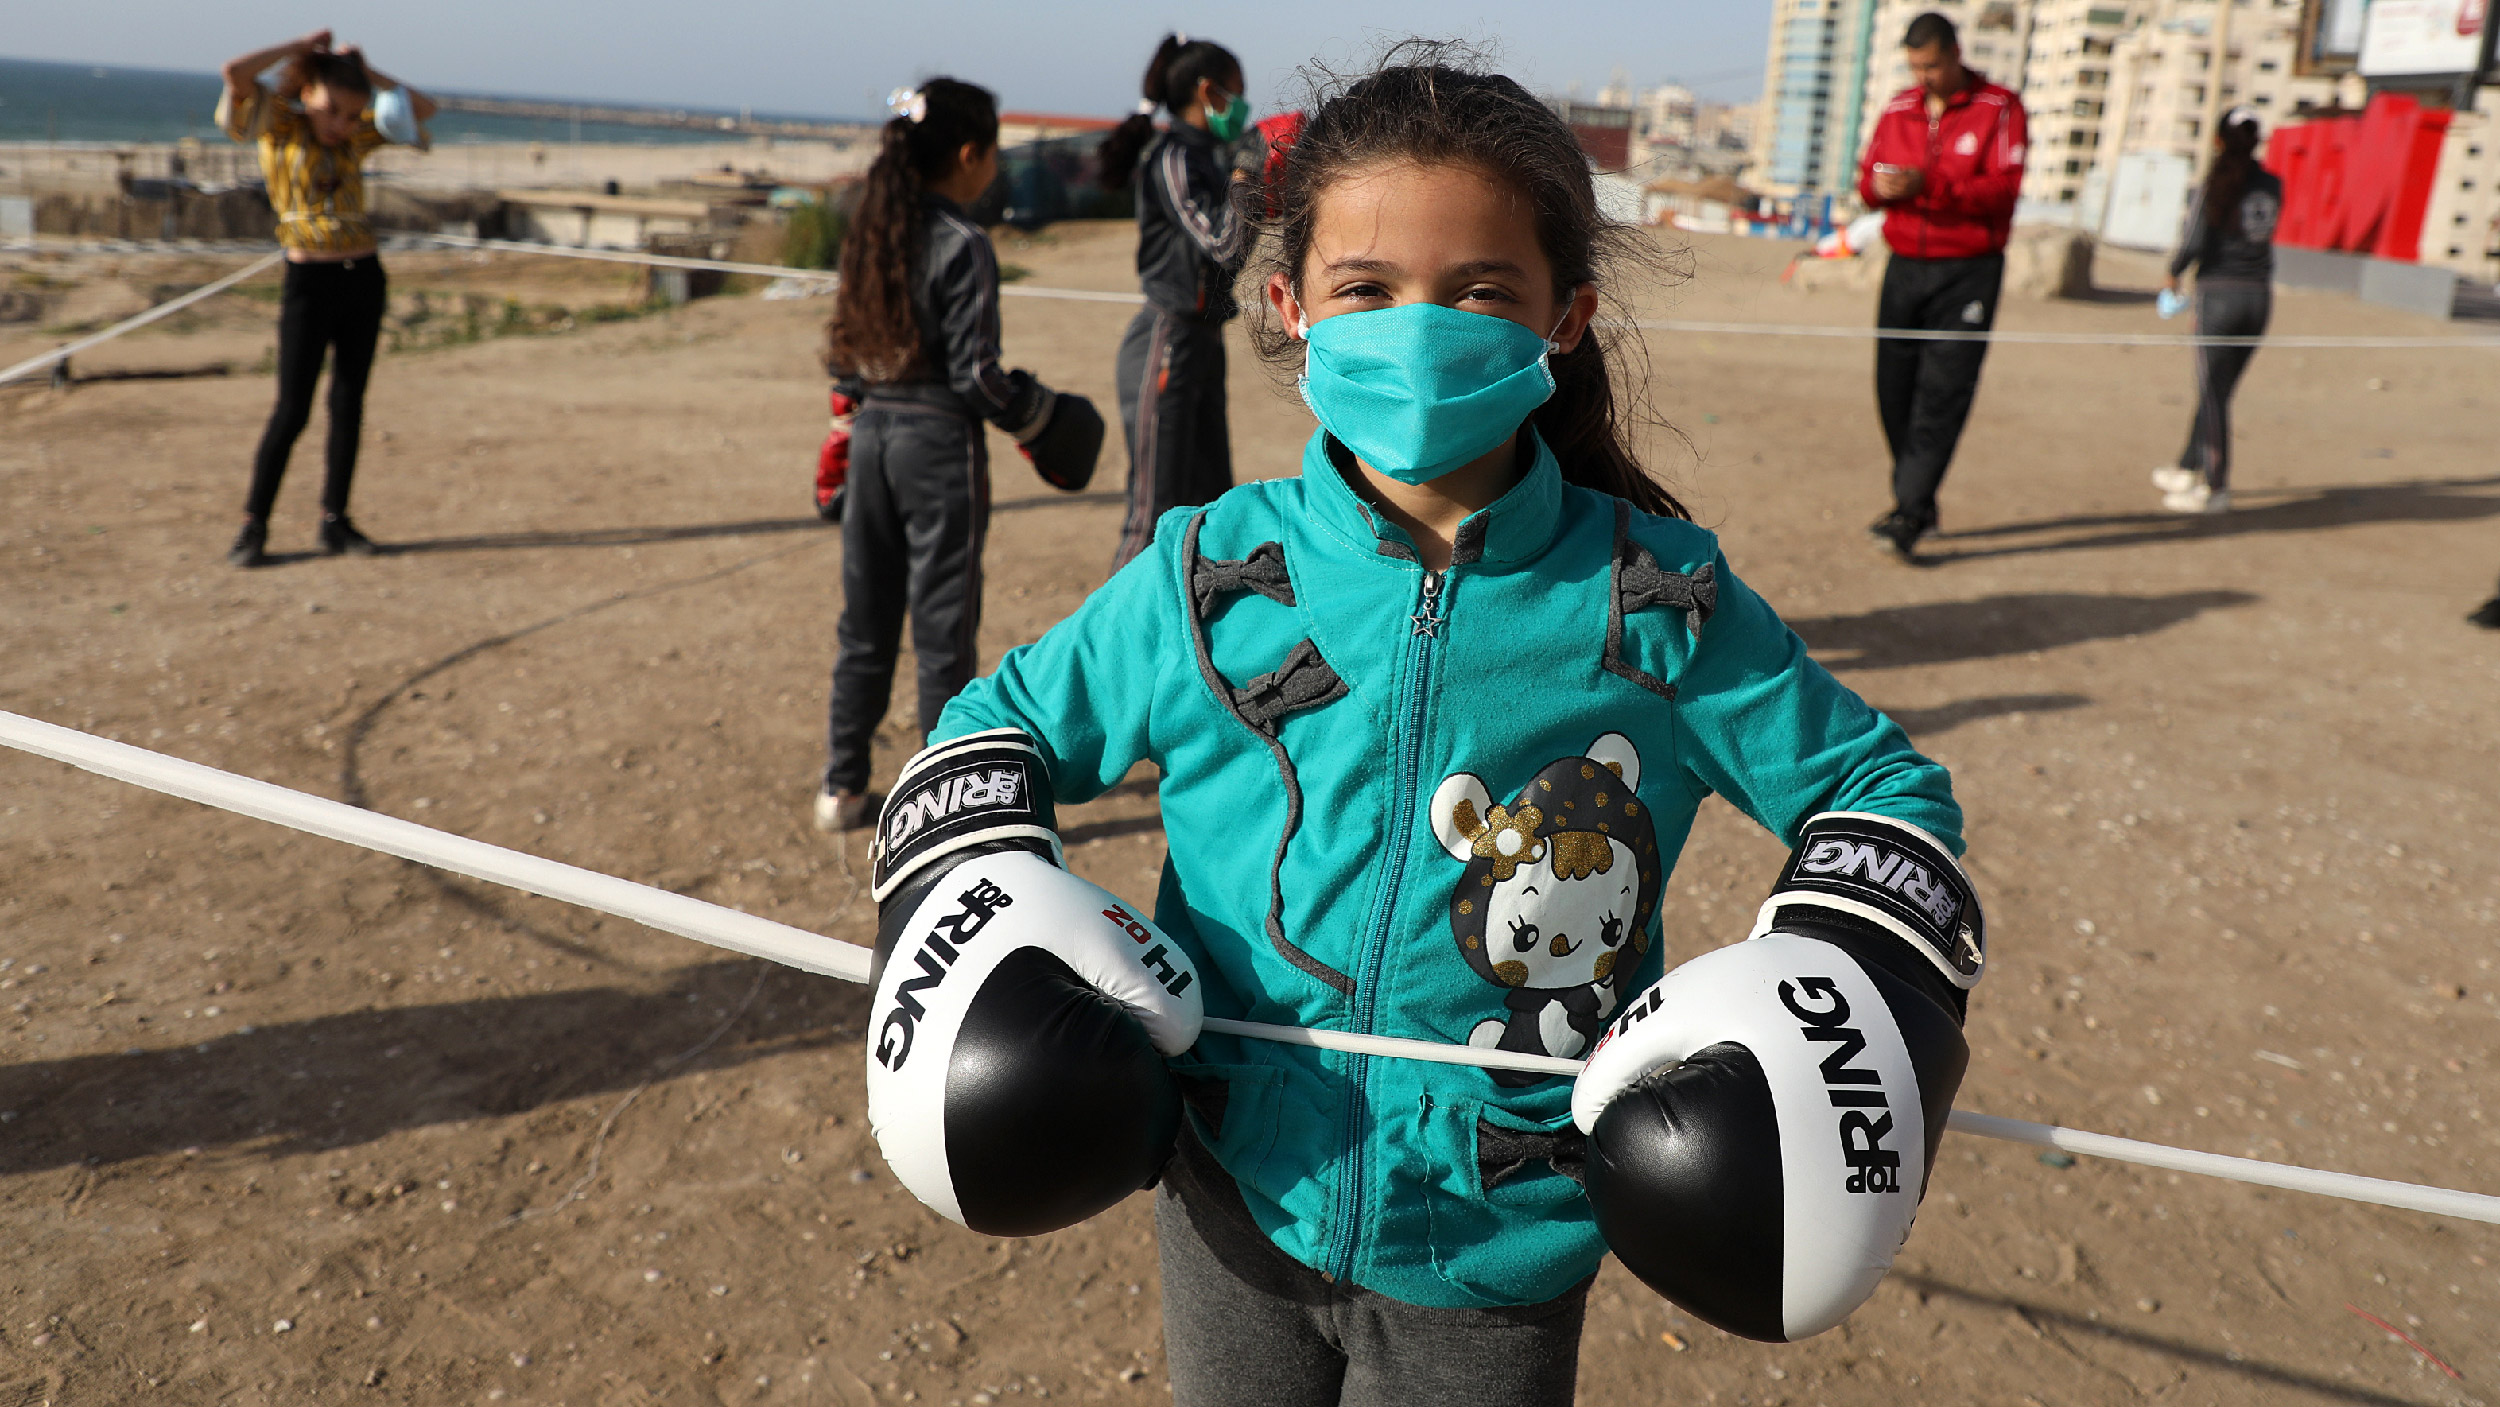 Palestinian girls clad in masks due to the COVID-19 coronavirus pandemic take part in an open-air boxing training near the beach in Gaza City on May 12, 2020. (Photo by Majdi Fathi/NurPhoto via Getty Images)